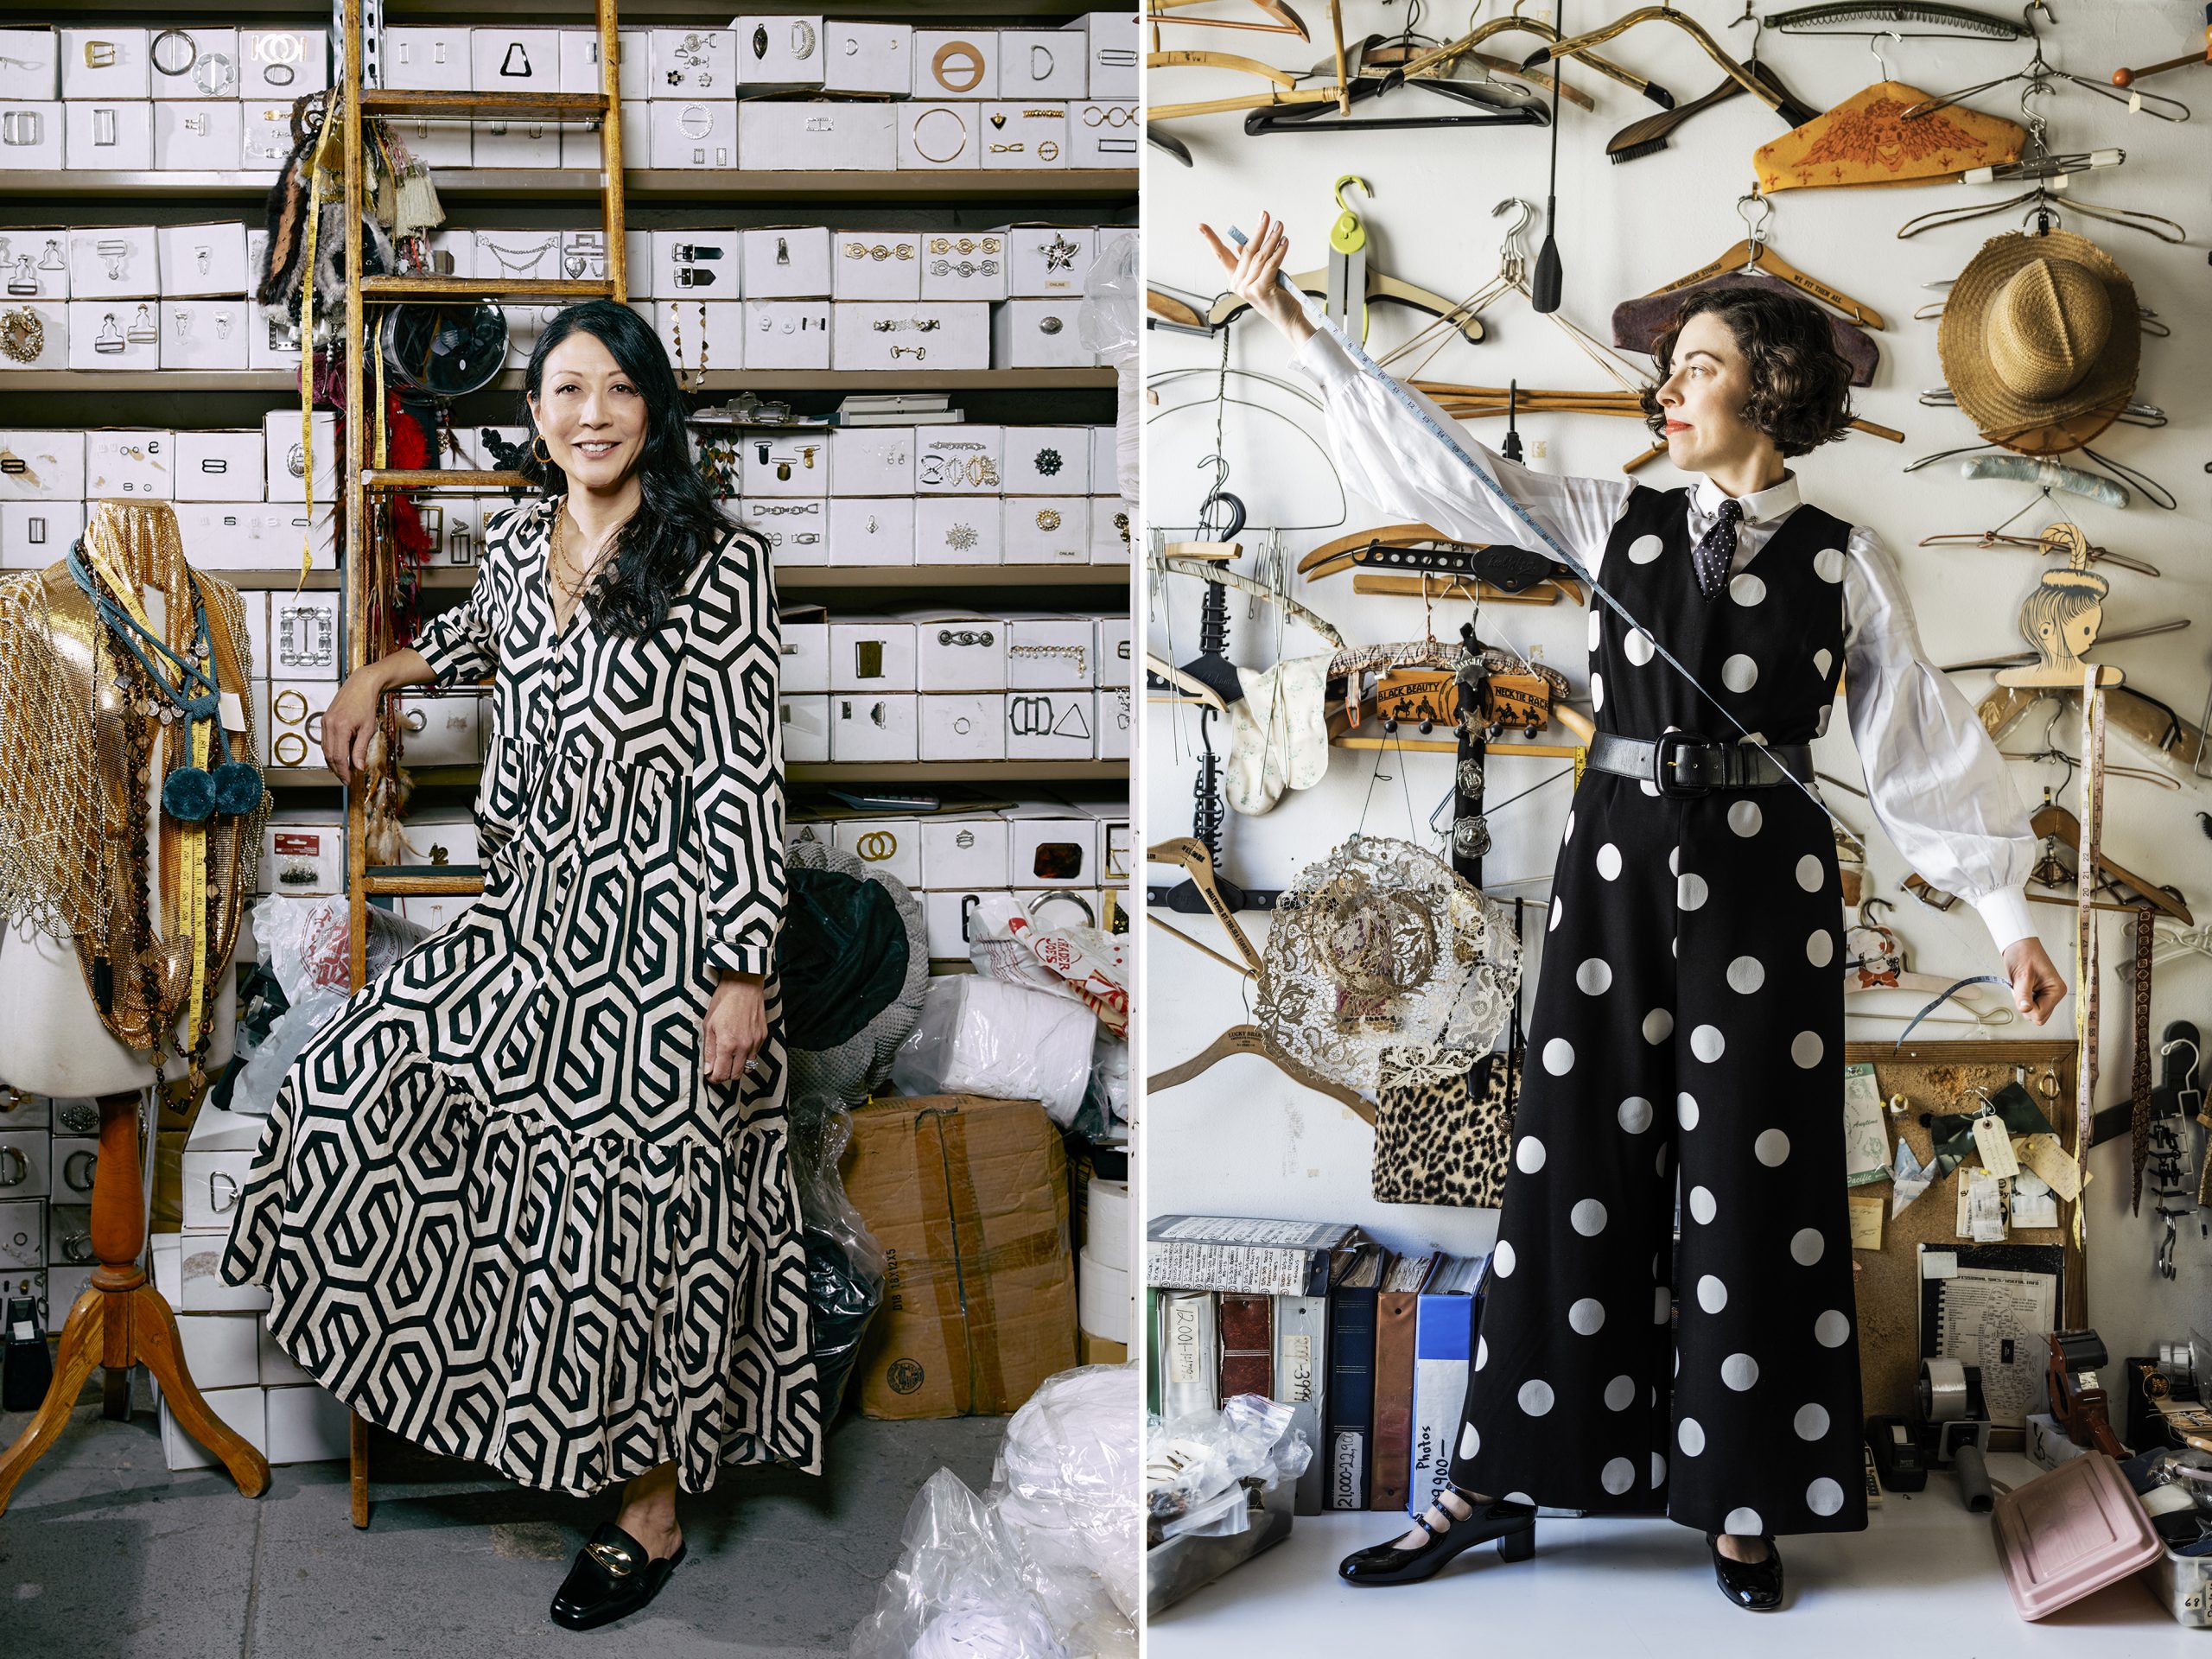 Costume designers Joyce Kim Lee and Natalie Turturro Mettouchi have helped  bring together iconic outfits for television shows like The Marvelous Mrs.  Maisel and Surfside Girls